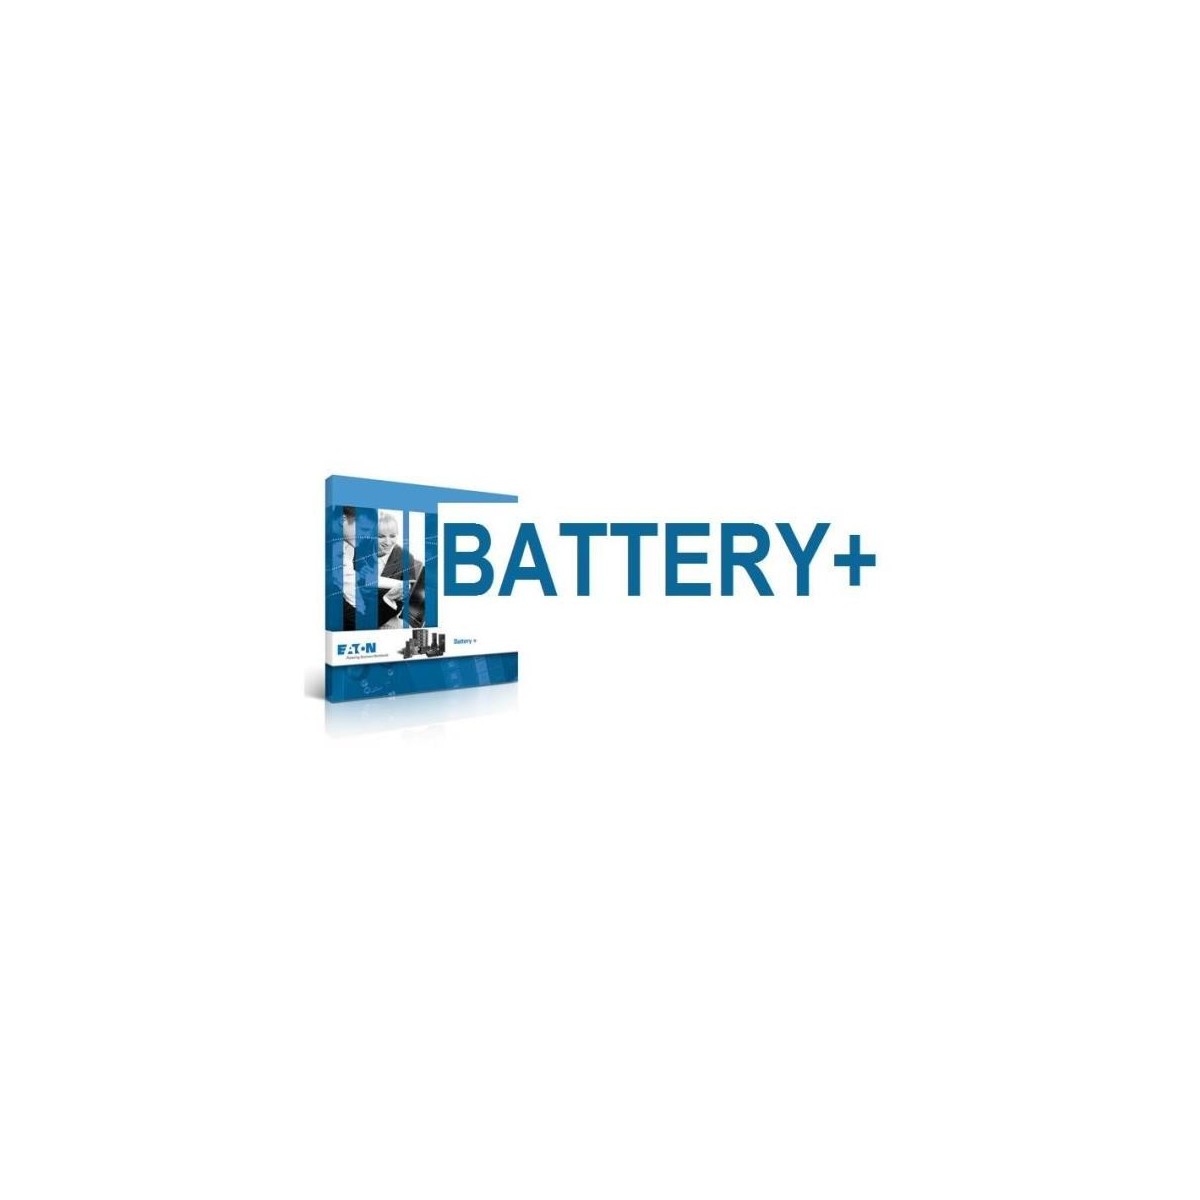 Eaton Battery+ - 1 license(s) - On-site-Carry-in